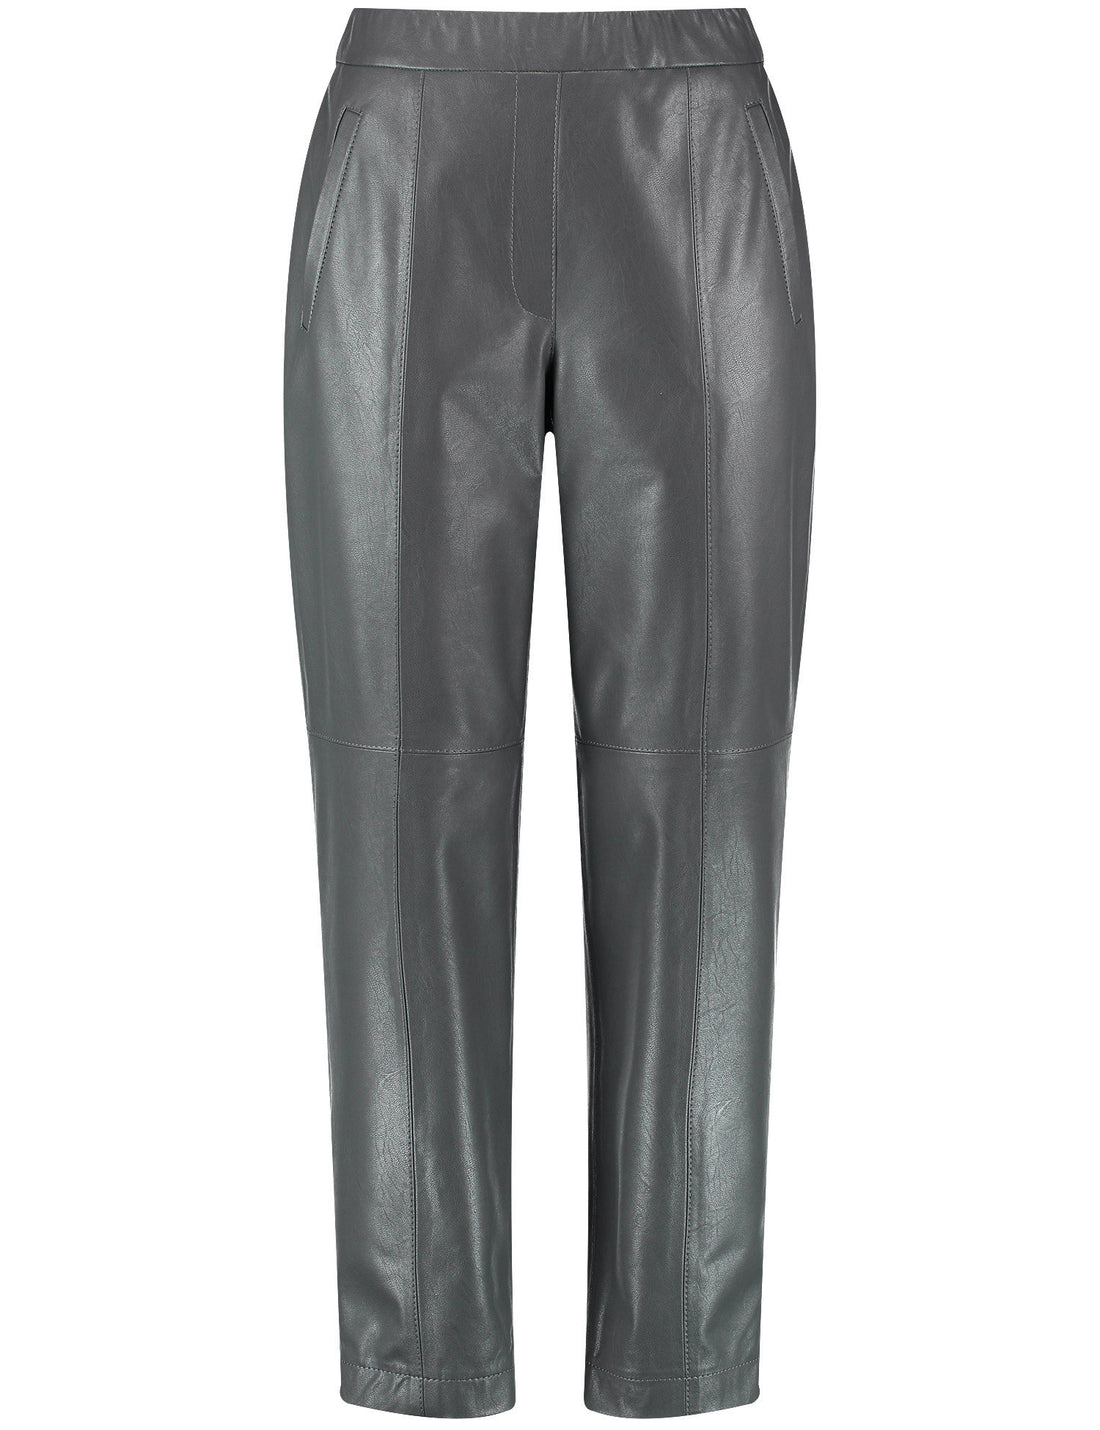 Casual 7/8-Length Trousers In Faux Leather_220019-31257_20383_02